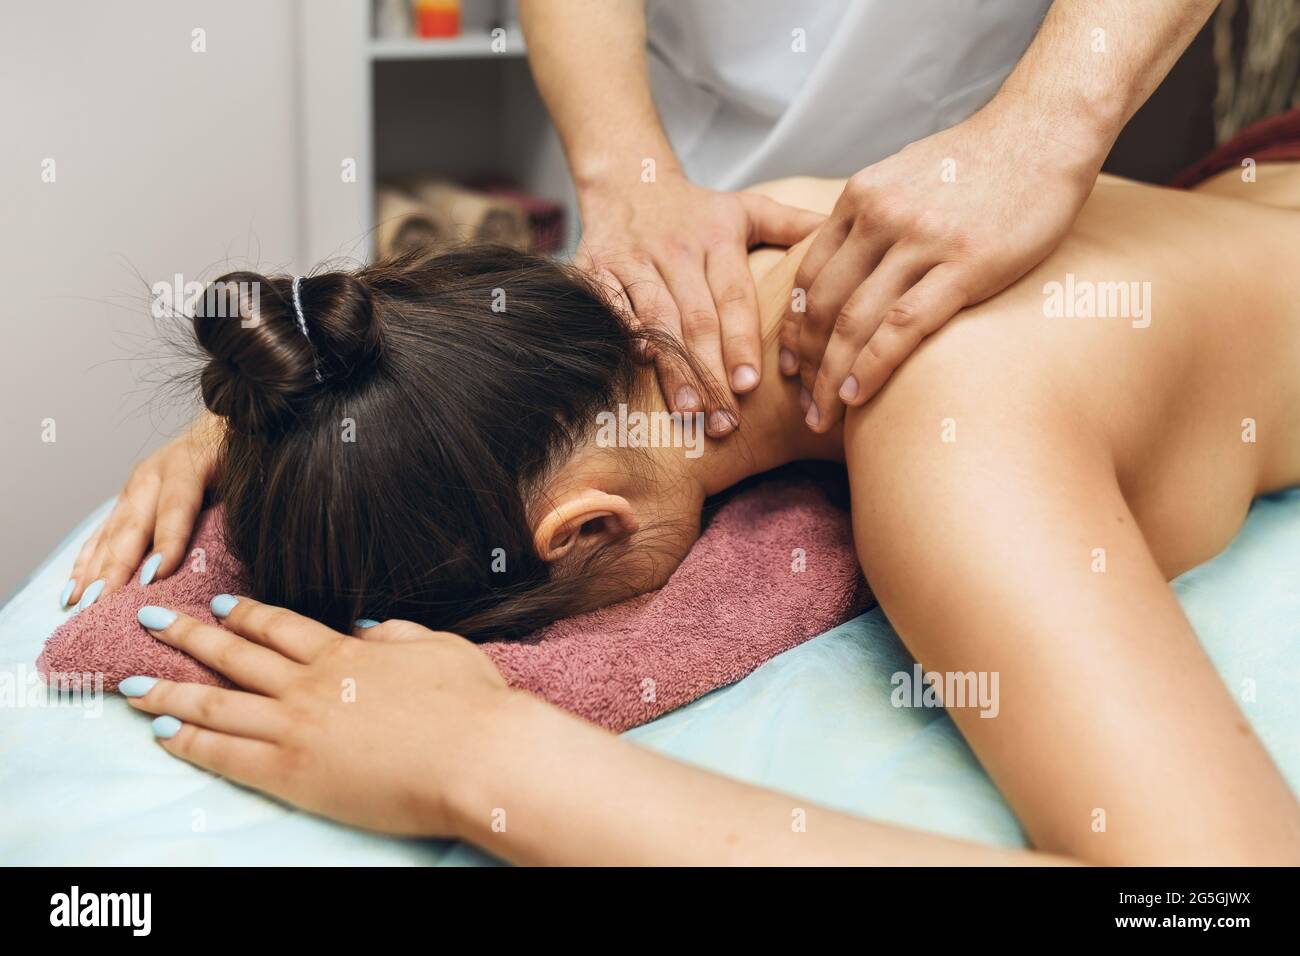 https://c8.alamy.com/comp/2G5GJWX/a-man-is-a-chiropractor-doing-a-massage-to-a-woman-in-the-neck-and-trapezius-muscles-in-his-office-2G5GJWX.jpg